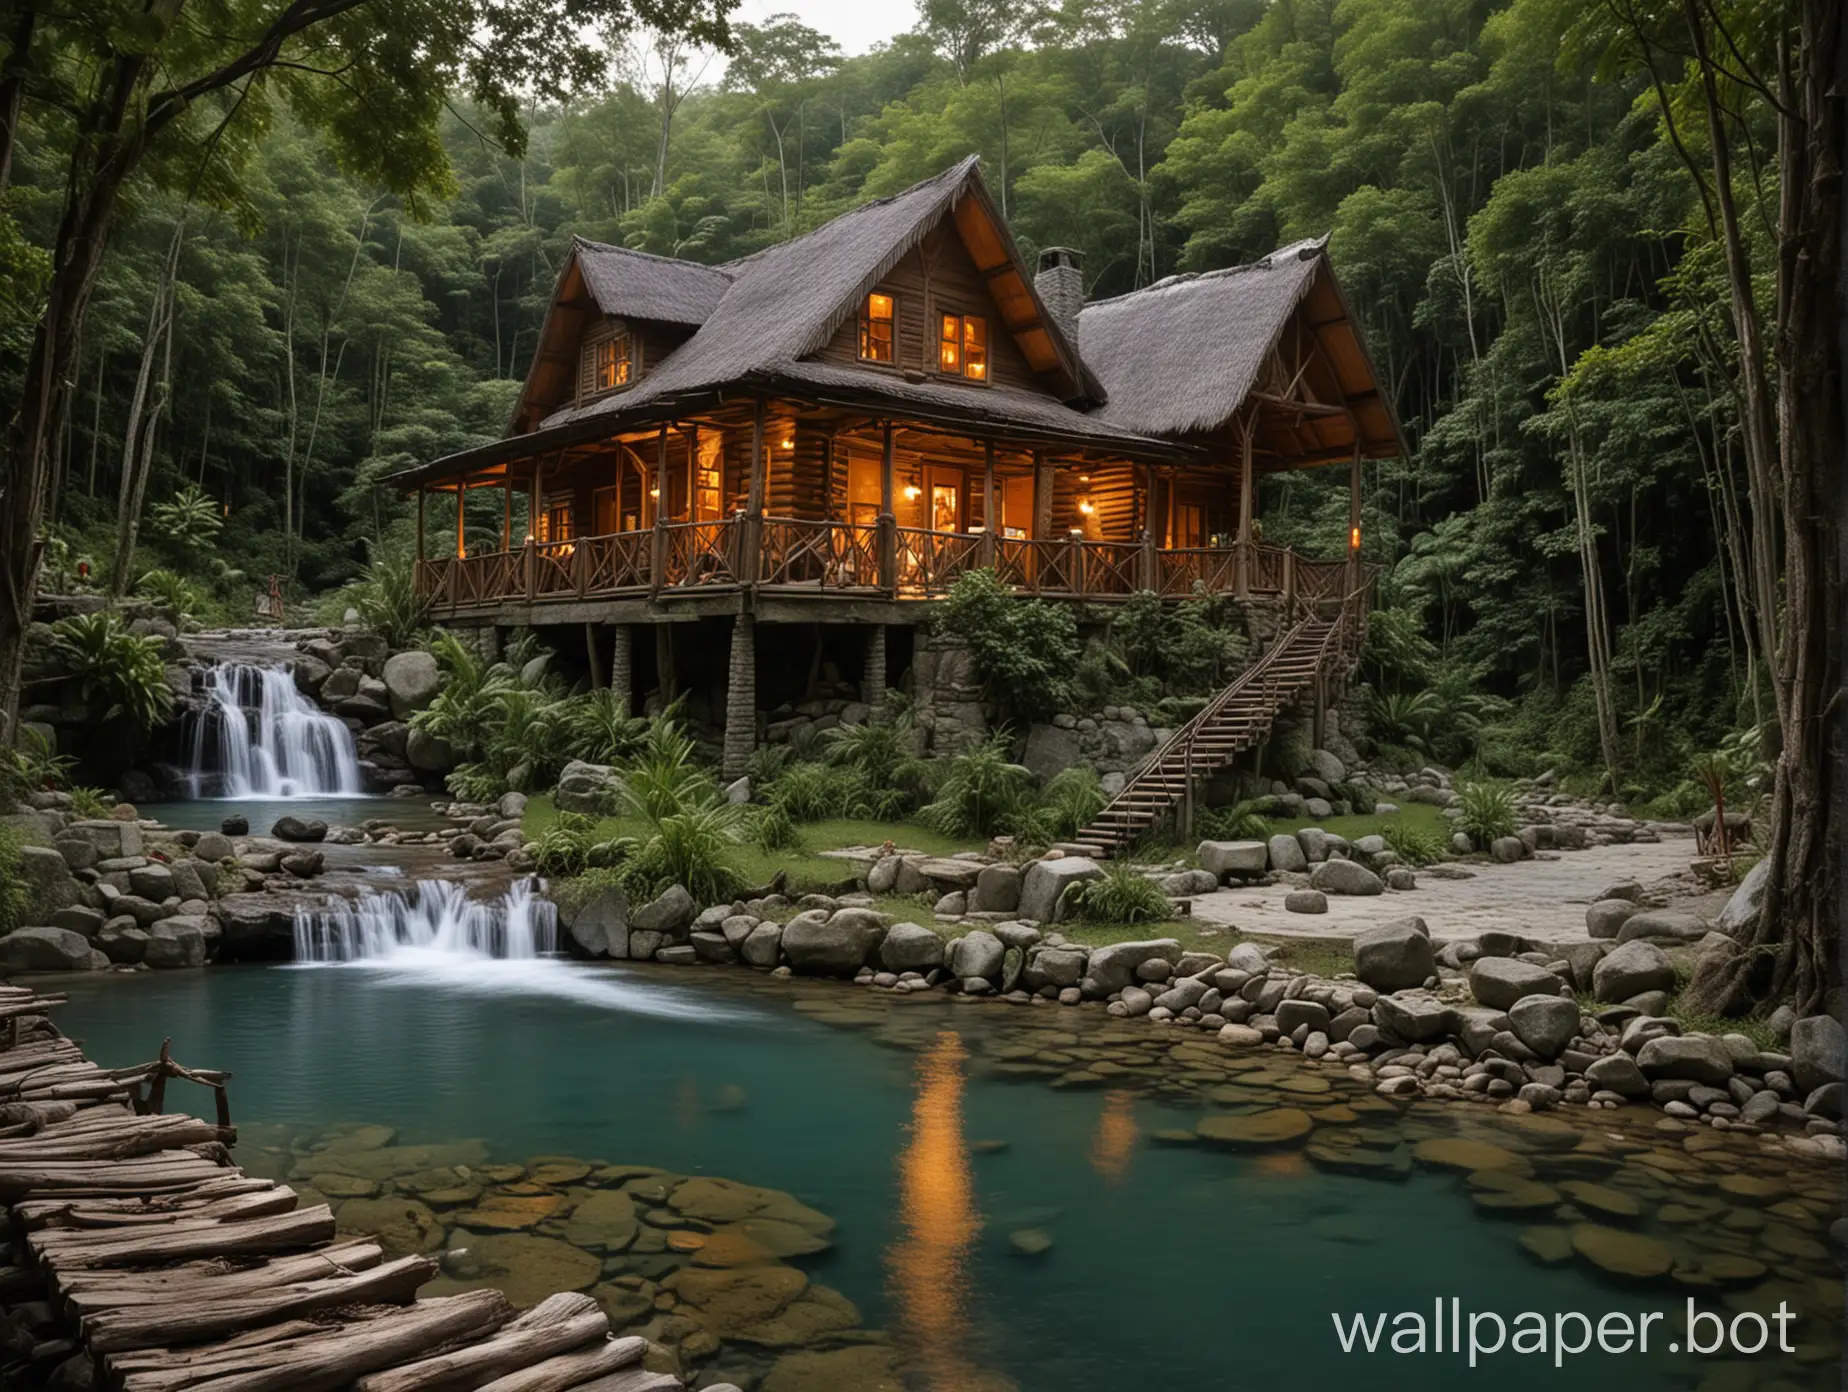 Secluded Log cabin in the mountains with a waterfall, clear water, Philippines, fireplace, Hammock on the porch, at night, tiki torches